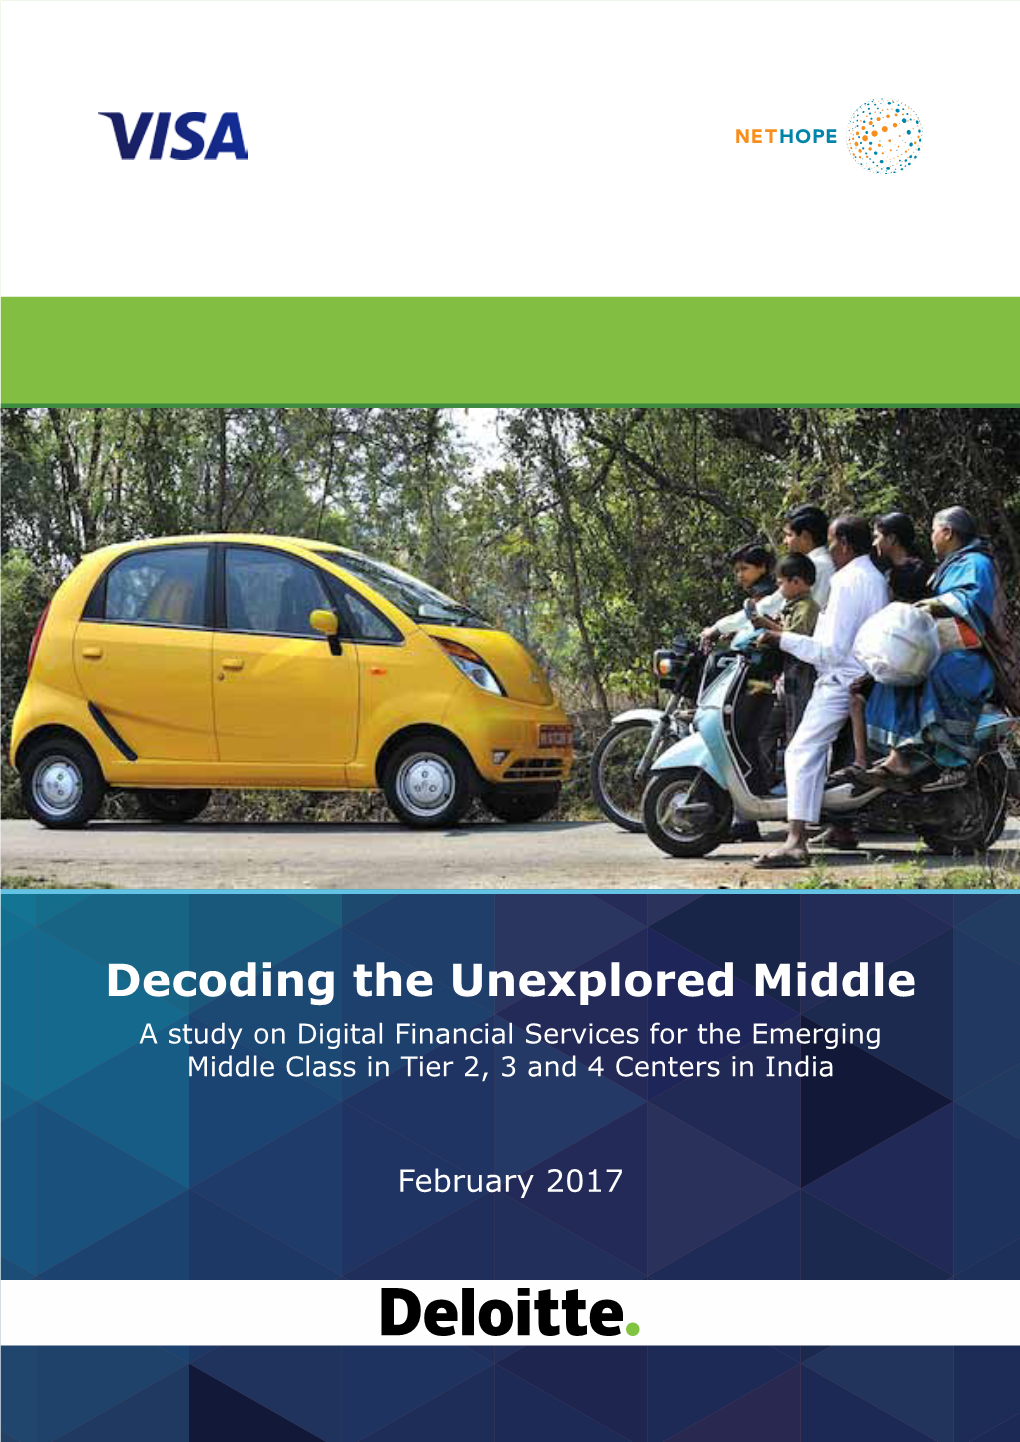 Decoding the Unexplored Middle a Study on Digital Financial Services for the Emerging Middle Class in Tier 2, 3 and 4 Centers in India